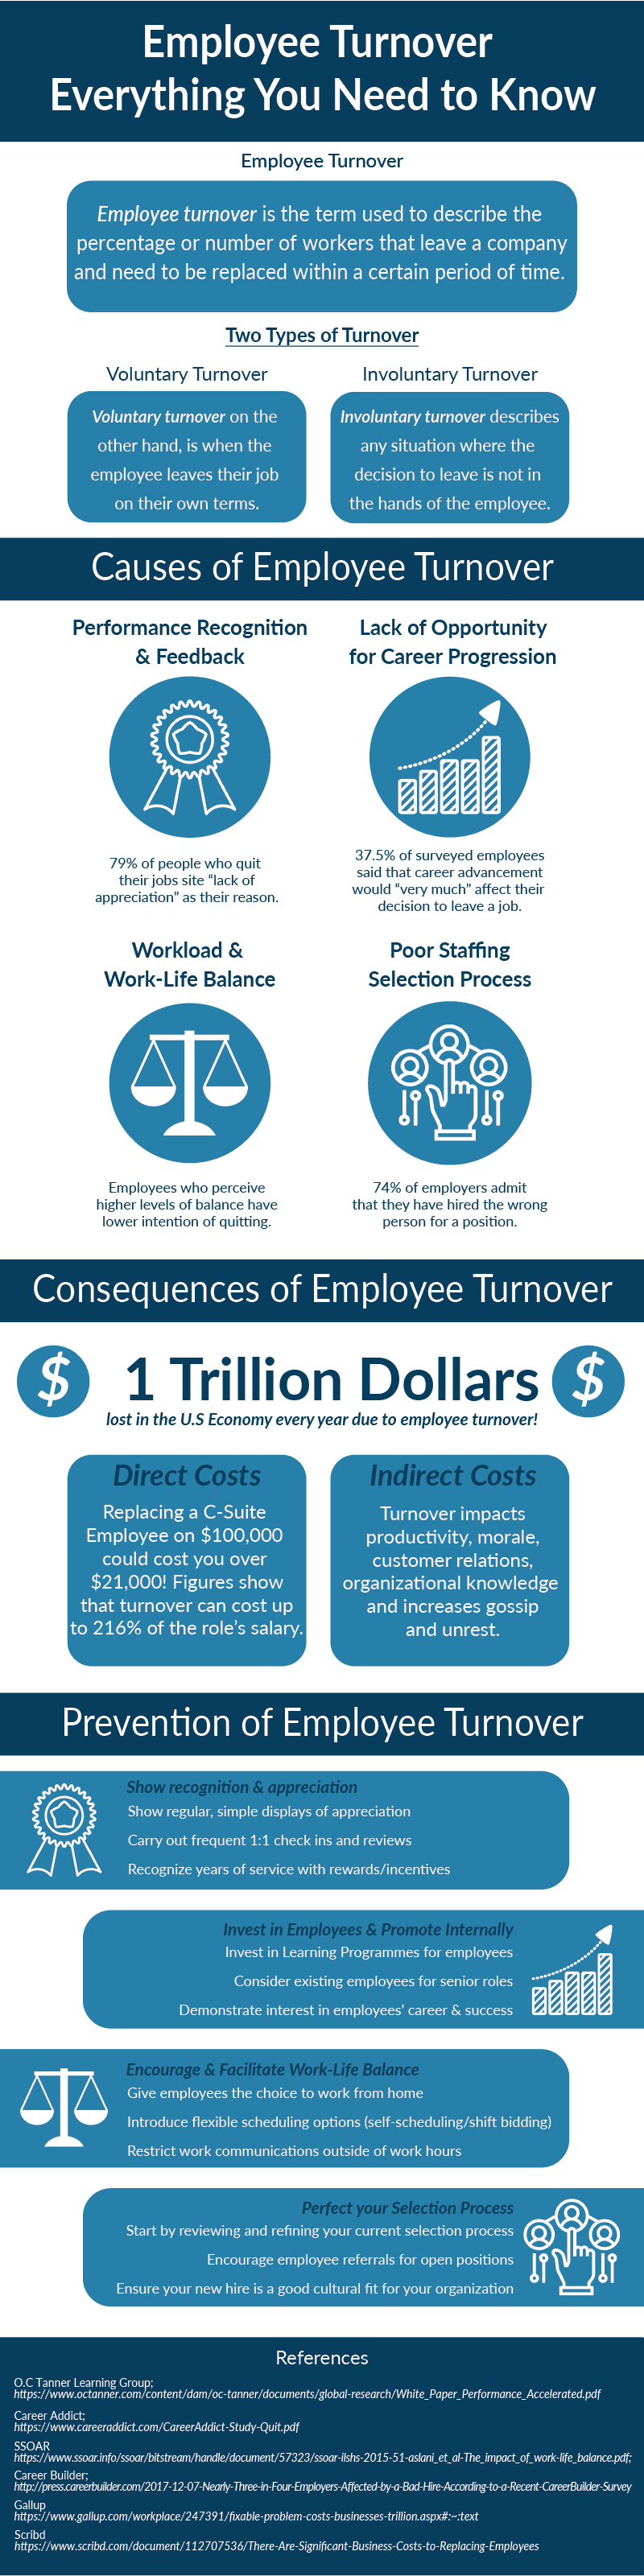 employee turnover infographic